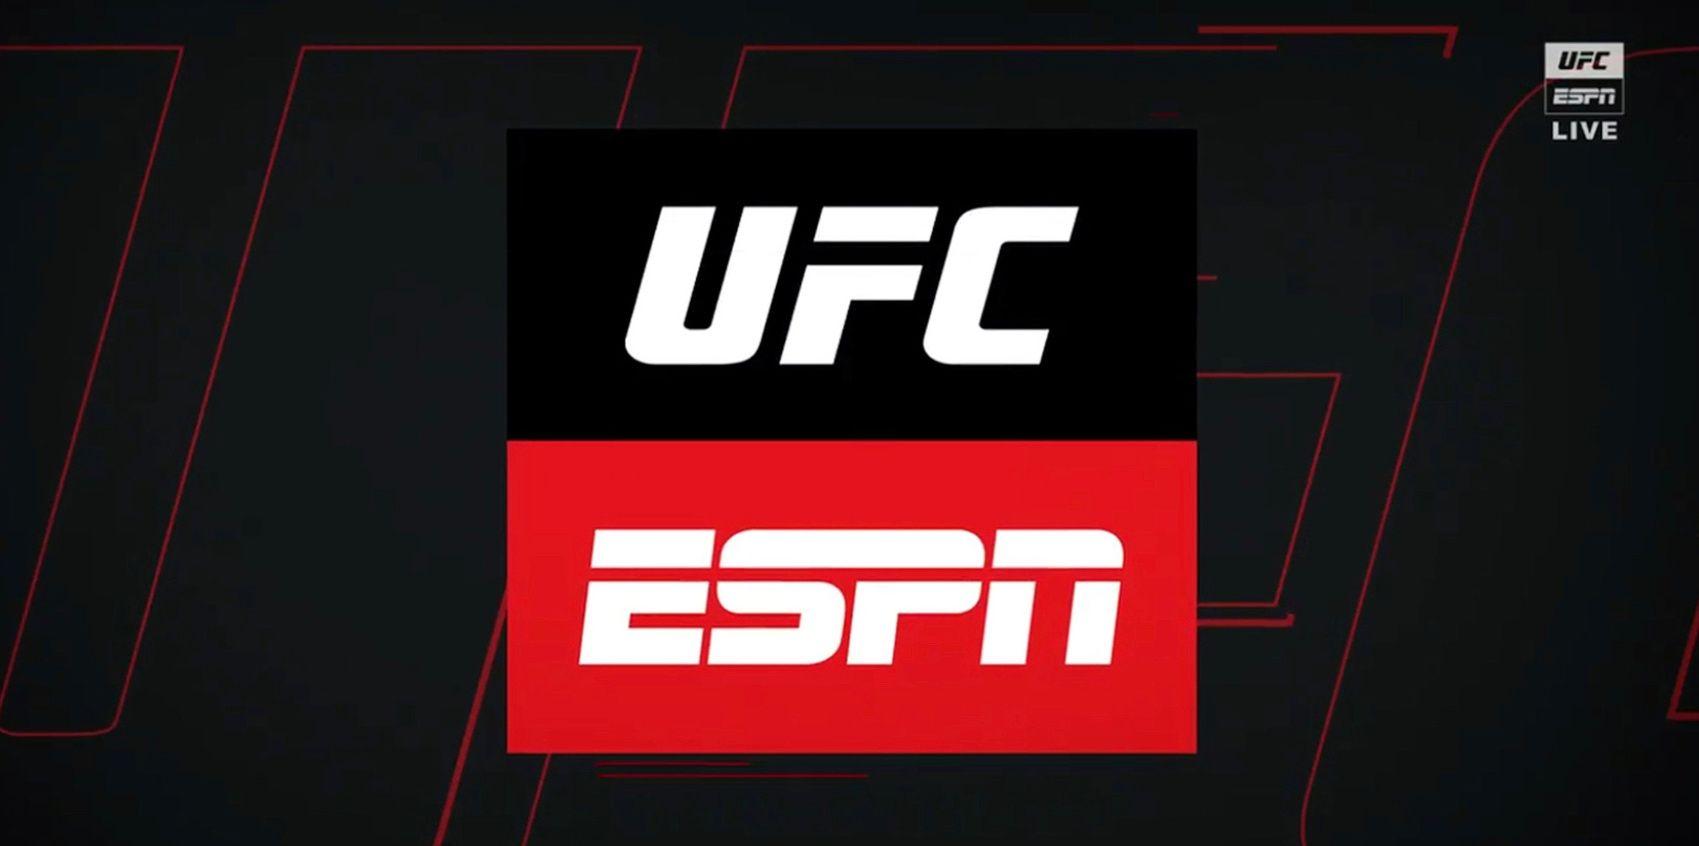 UFC Pay-Per-View Price Set to Rise Once Again Next Year